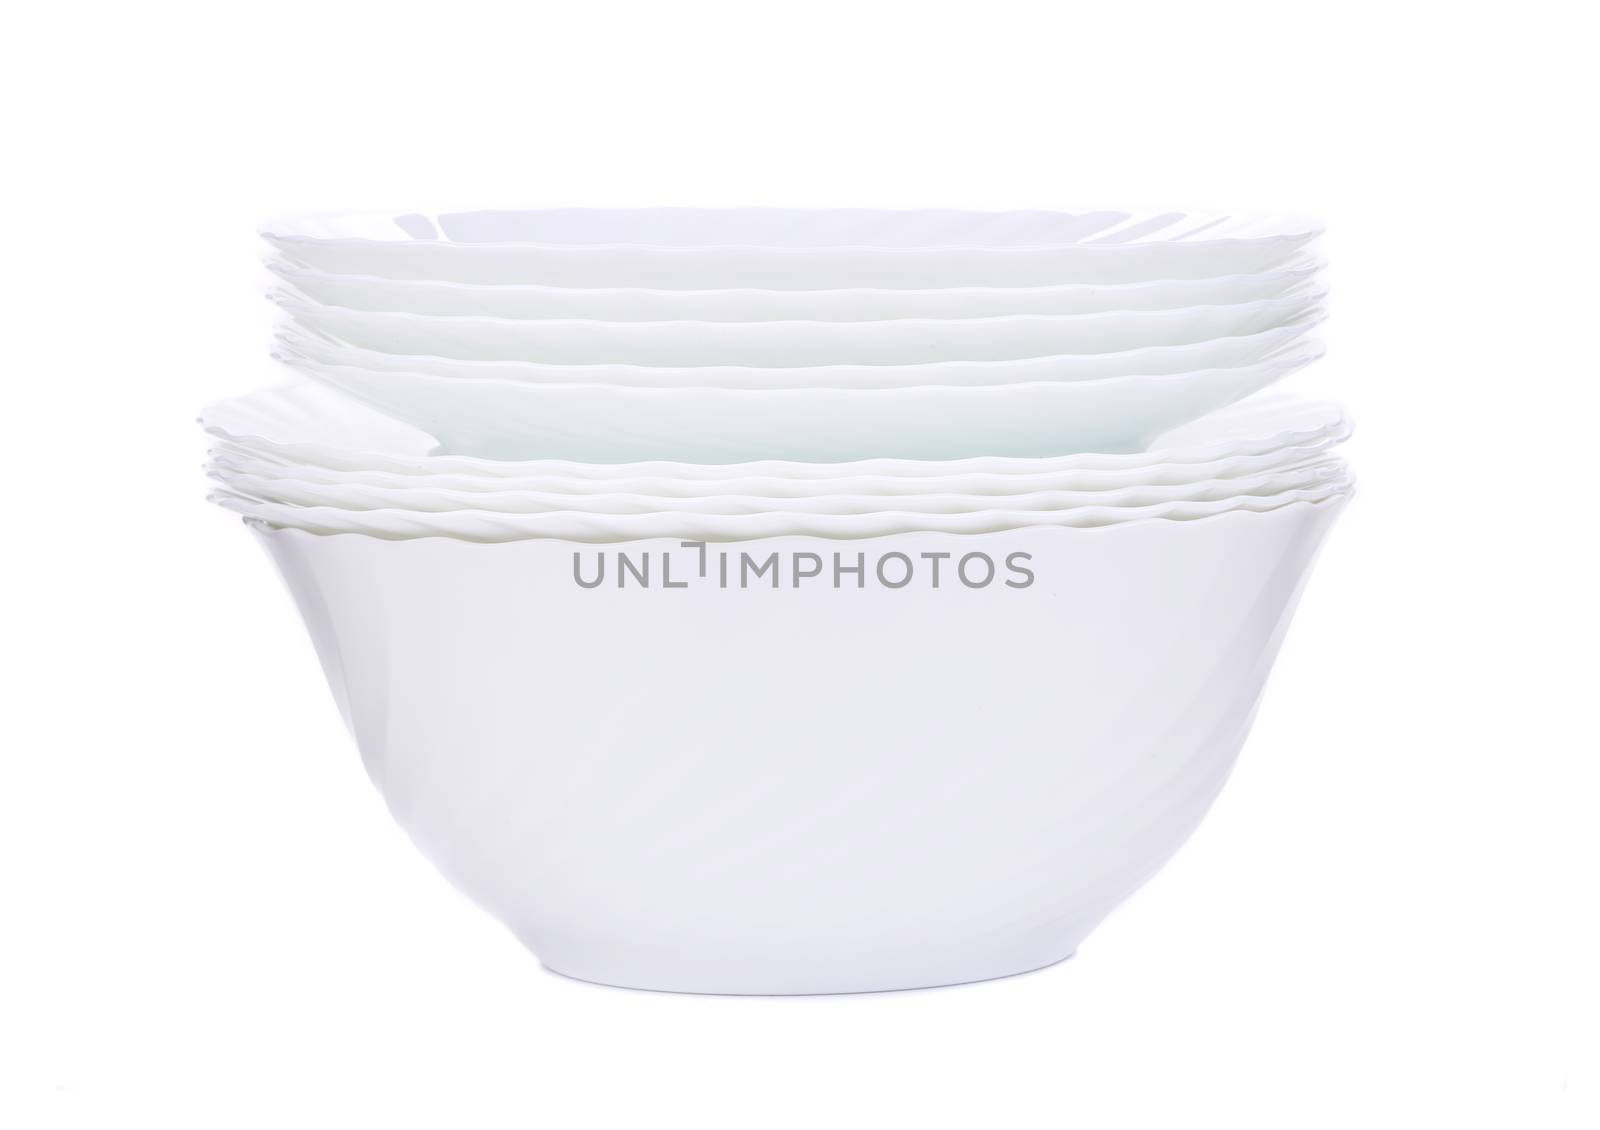 Stack of new clean white plates. Isolated on a white background.